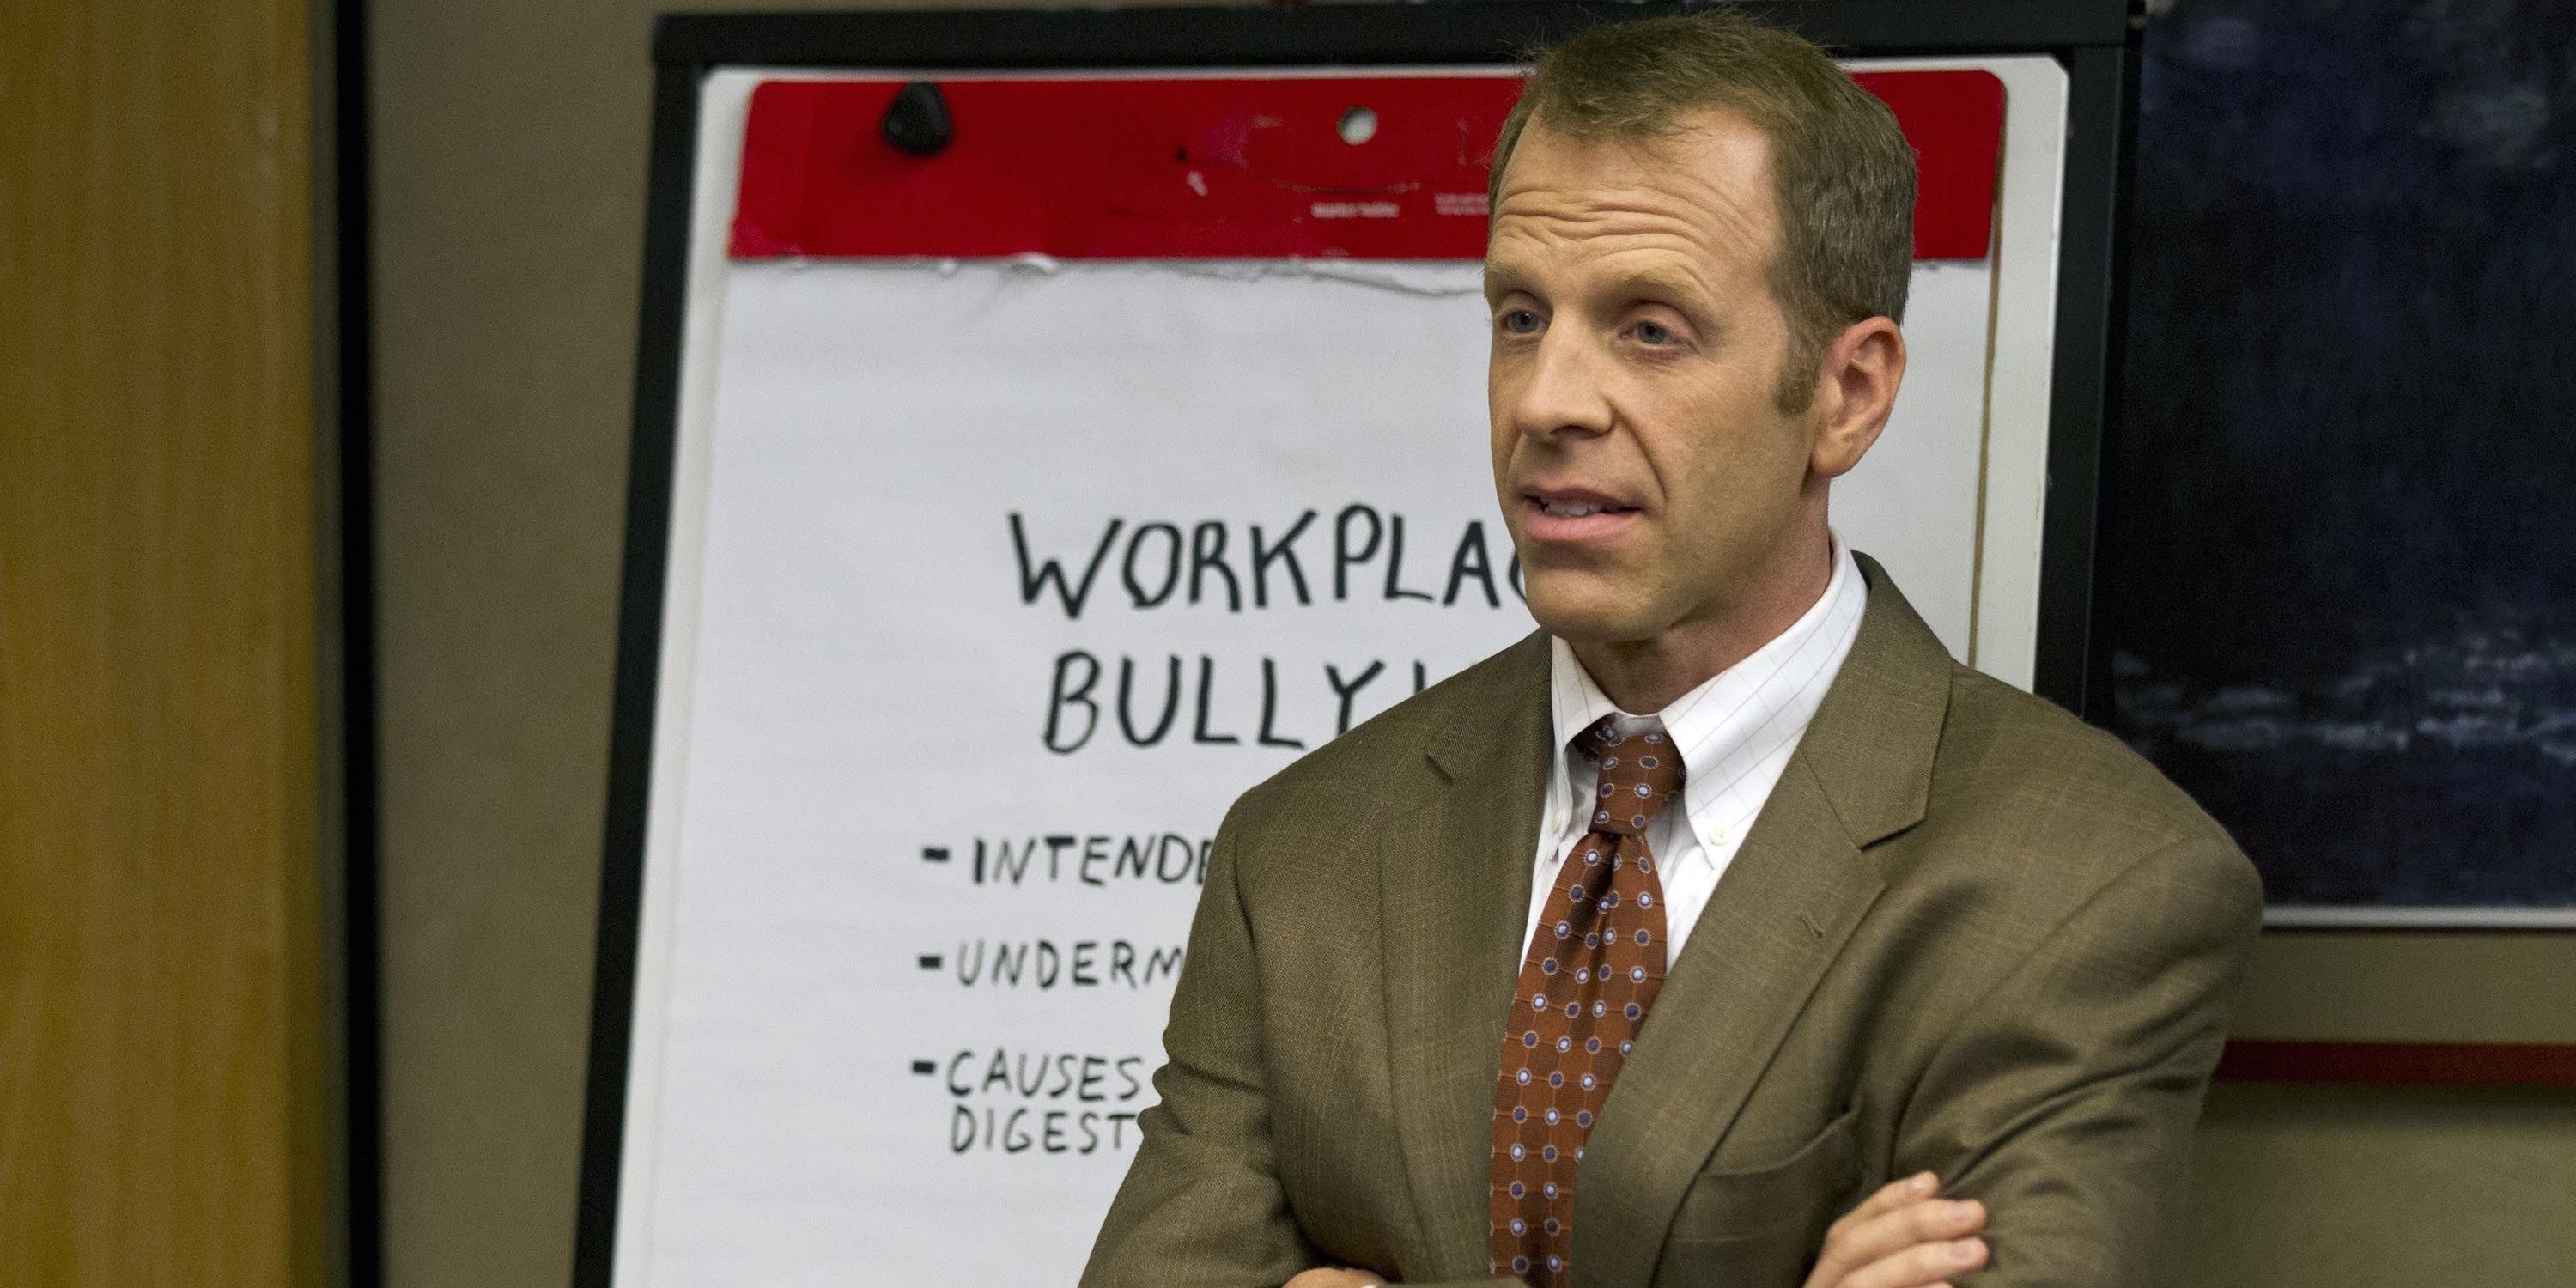 Toby giving a meeting on bullying on The Office